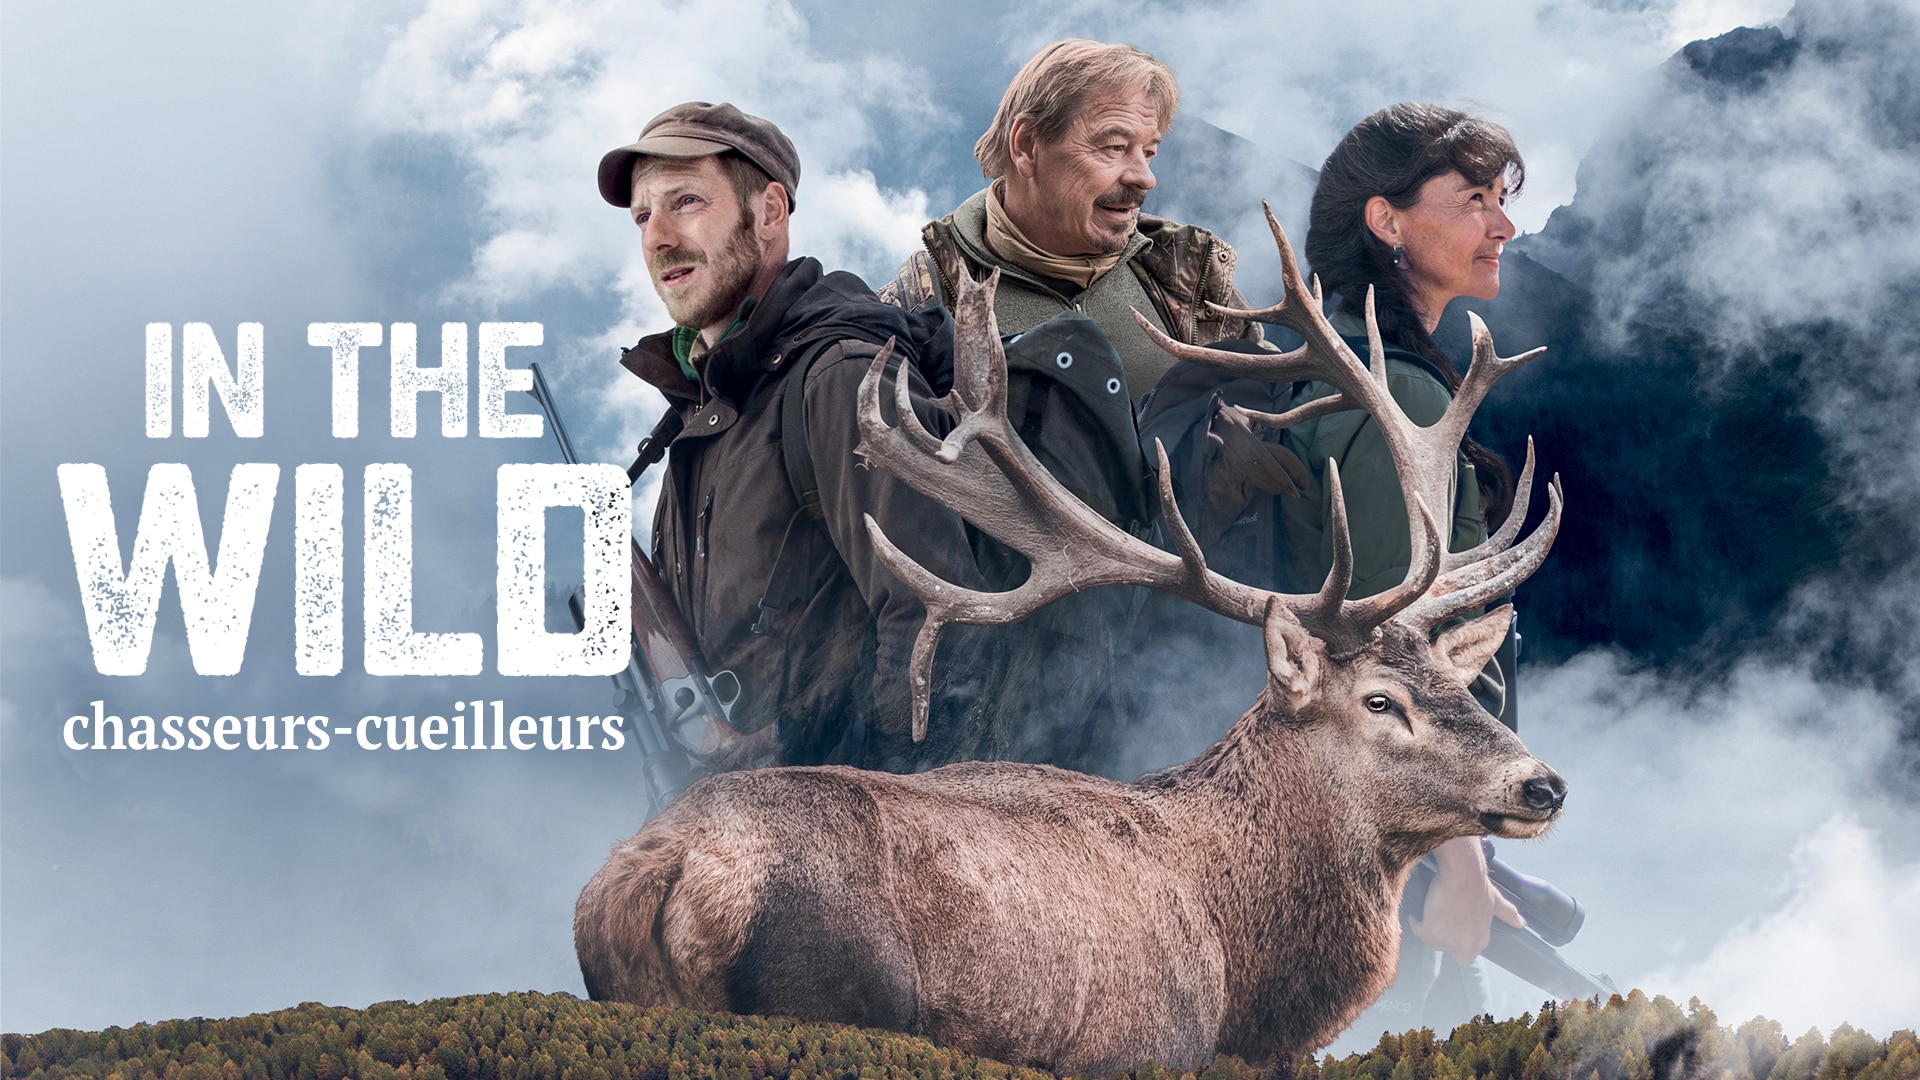 In the Wild - Chasseur-cueilleur